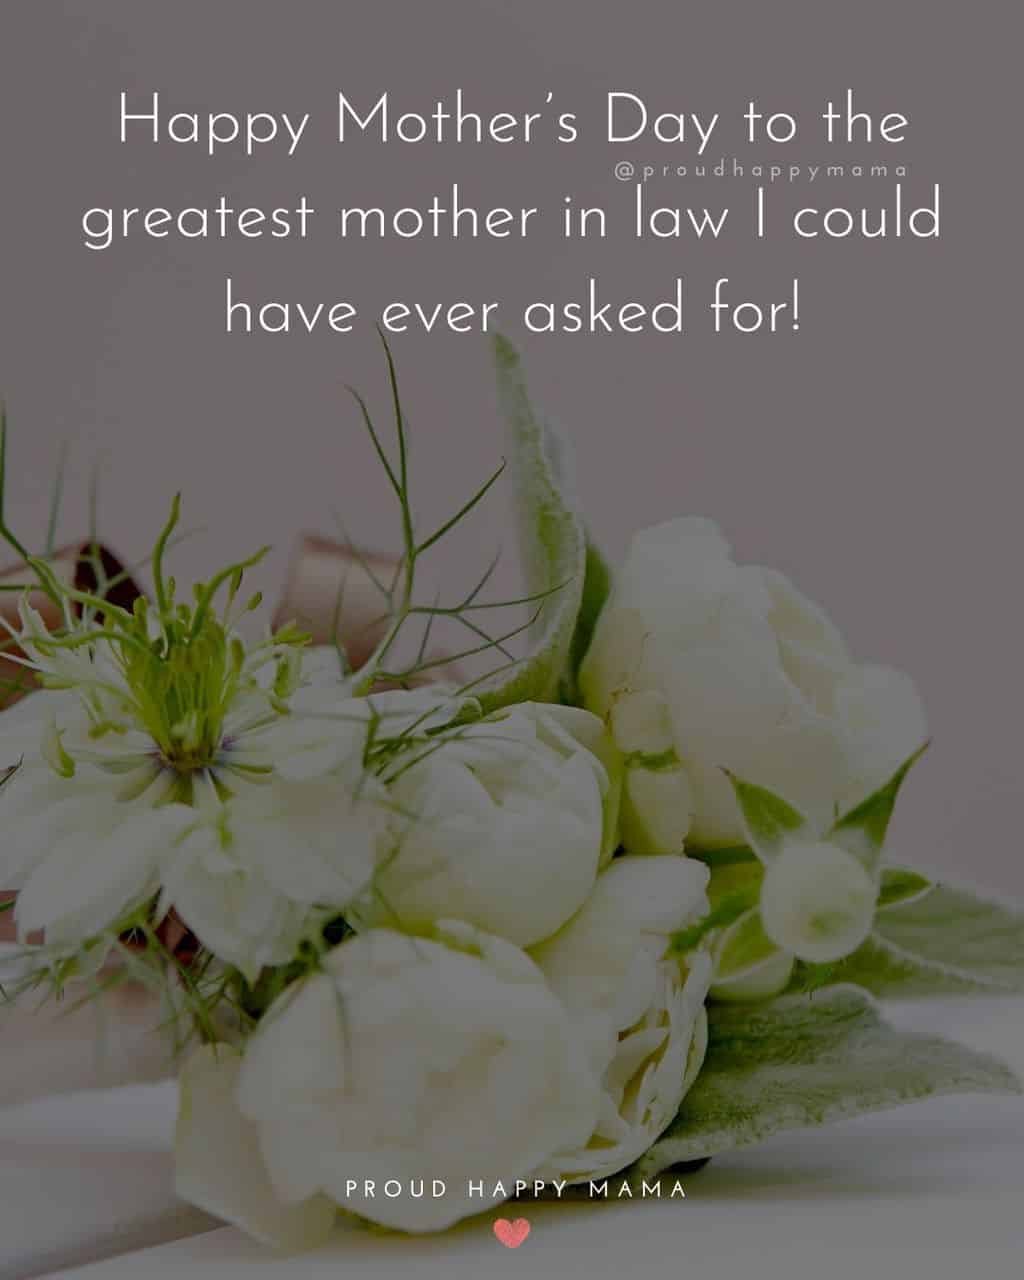 Happy Mothers Day Quotes For Mother In Law - Happy Mother’s Day to the greatest mother in law I could have ever asked for!’